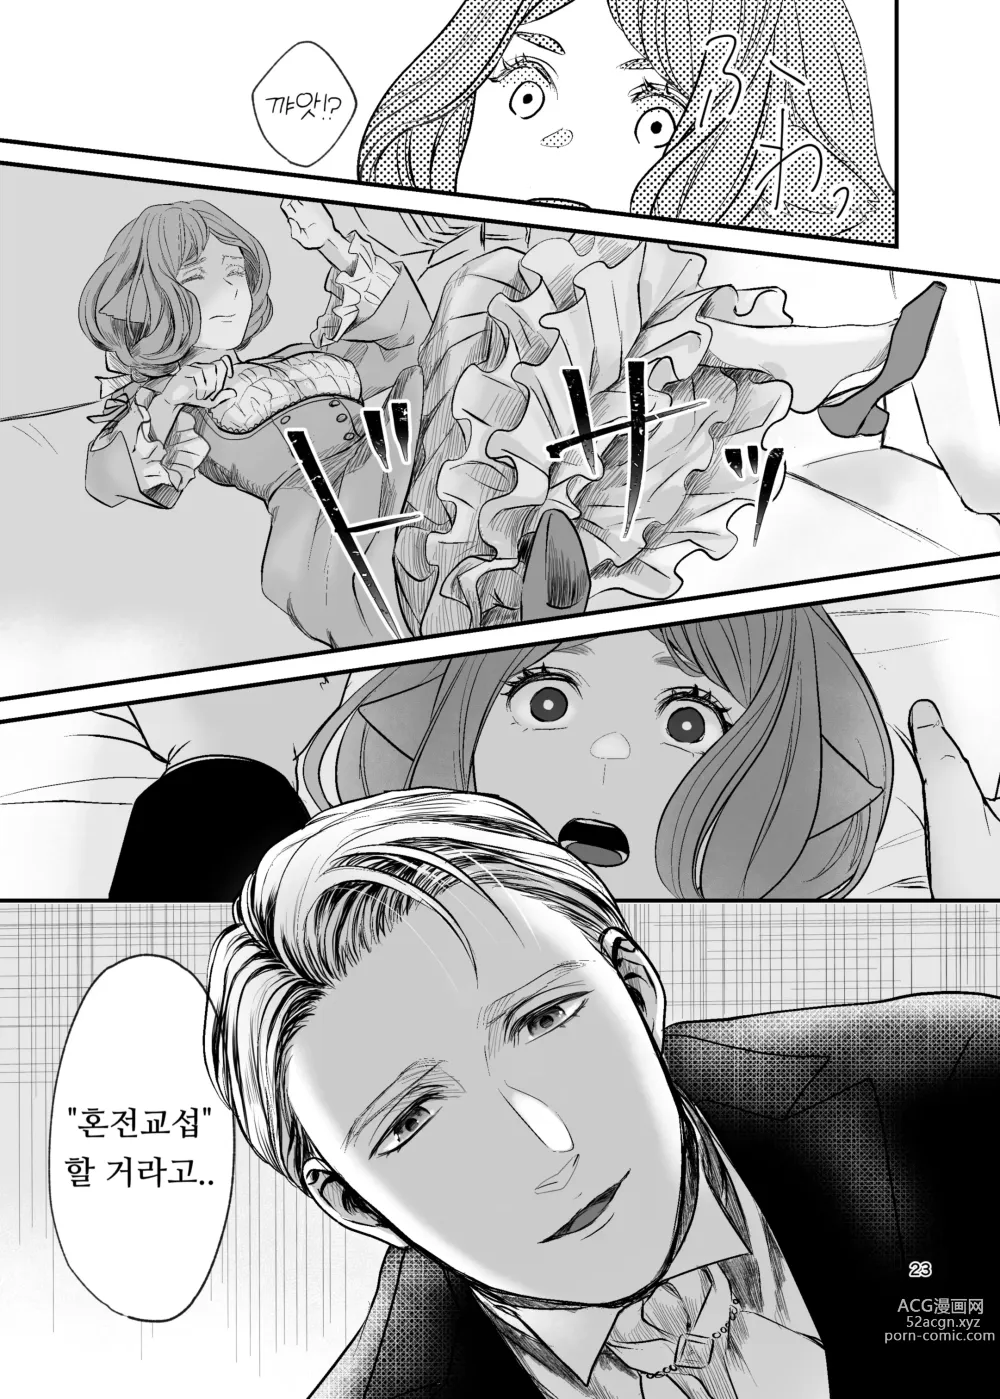 Page 23 of doujinshi 수인 영애와 혼약자